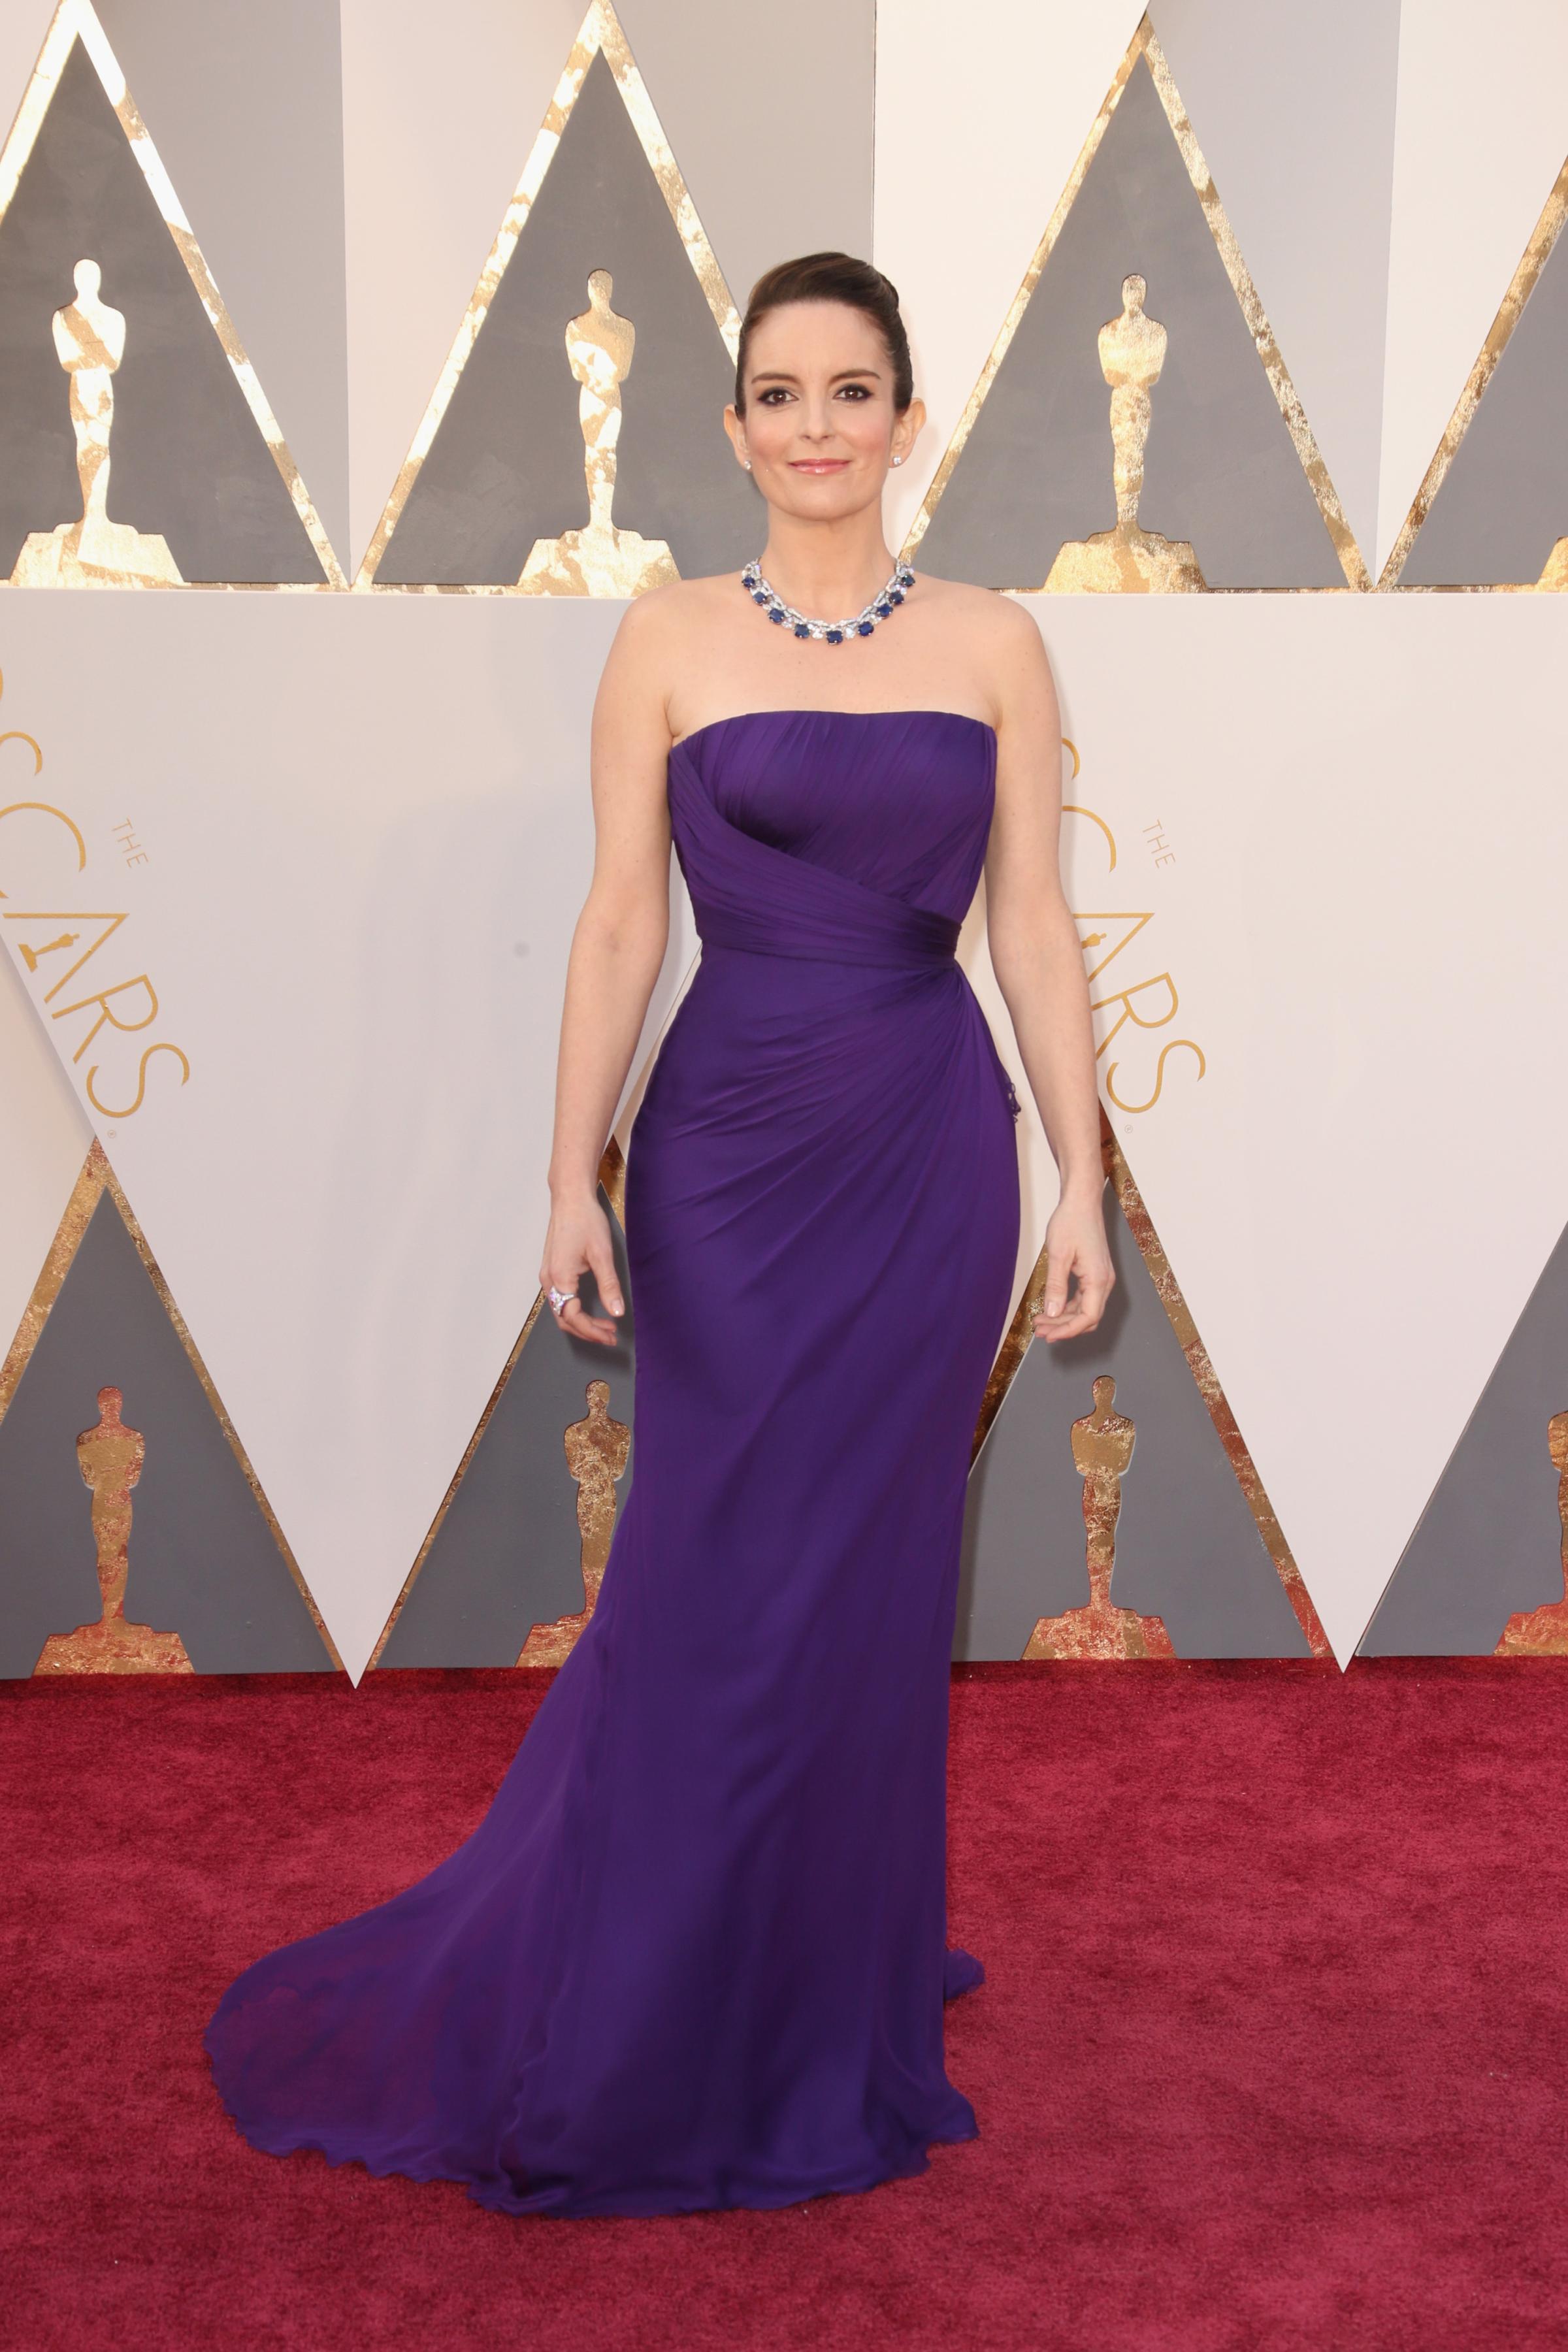 Tina Fey attends the 88th Annual Academy Awards on Feb. 28, 2016 in Hollywood, Calif.